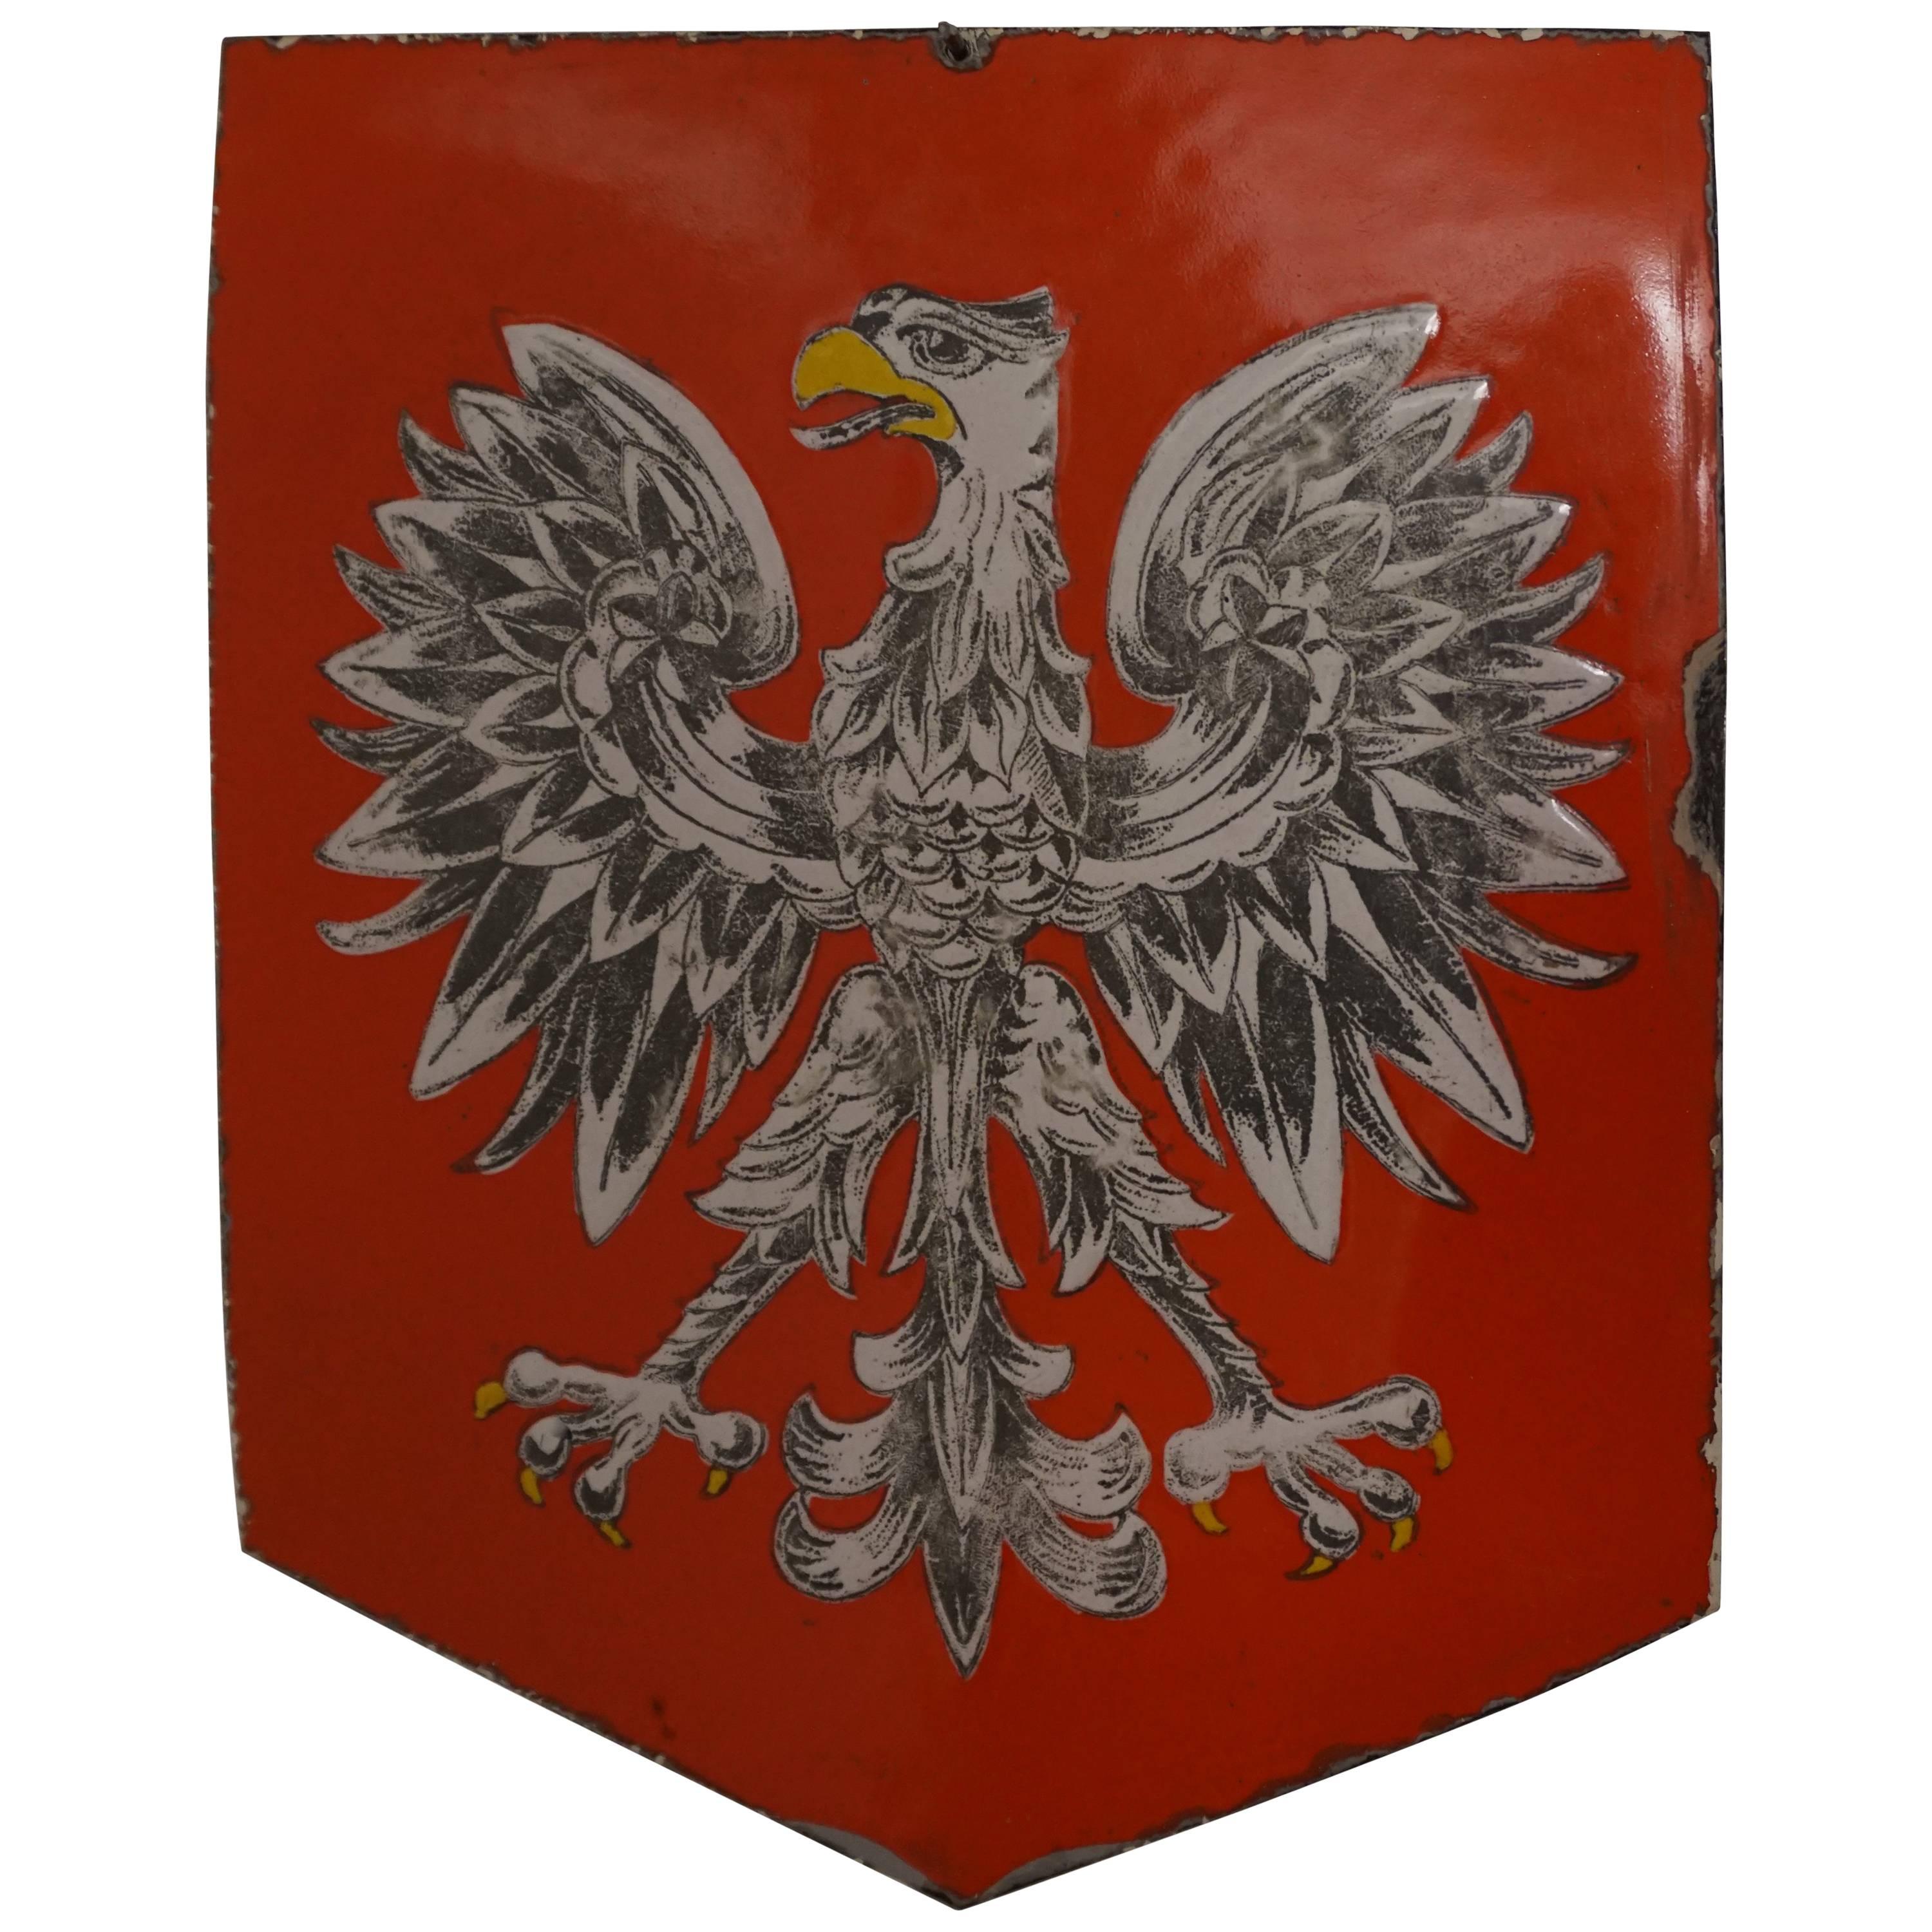 Mid to Early 20th Century Enameled Coat of Arms / Crest of White Eagle of Poland